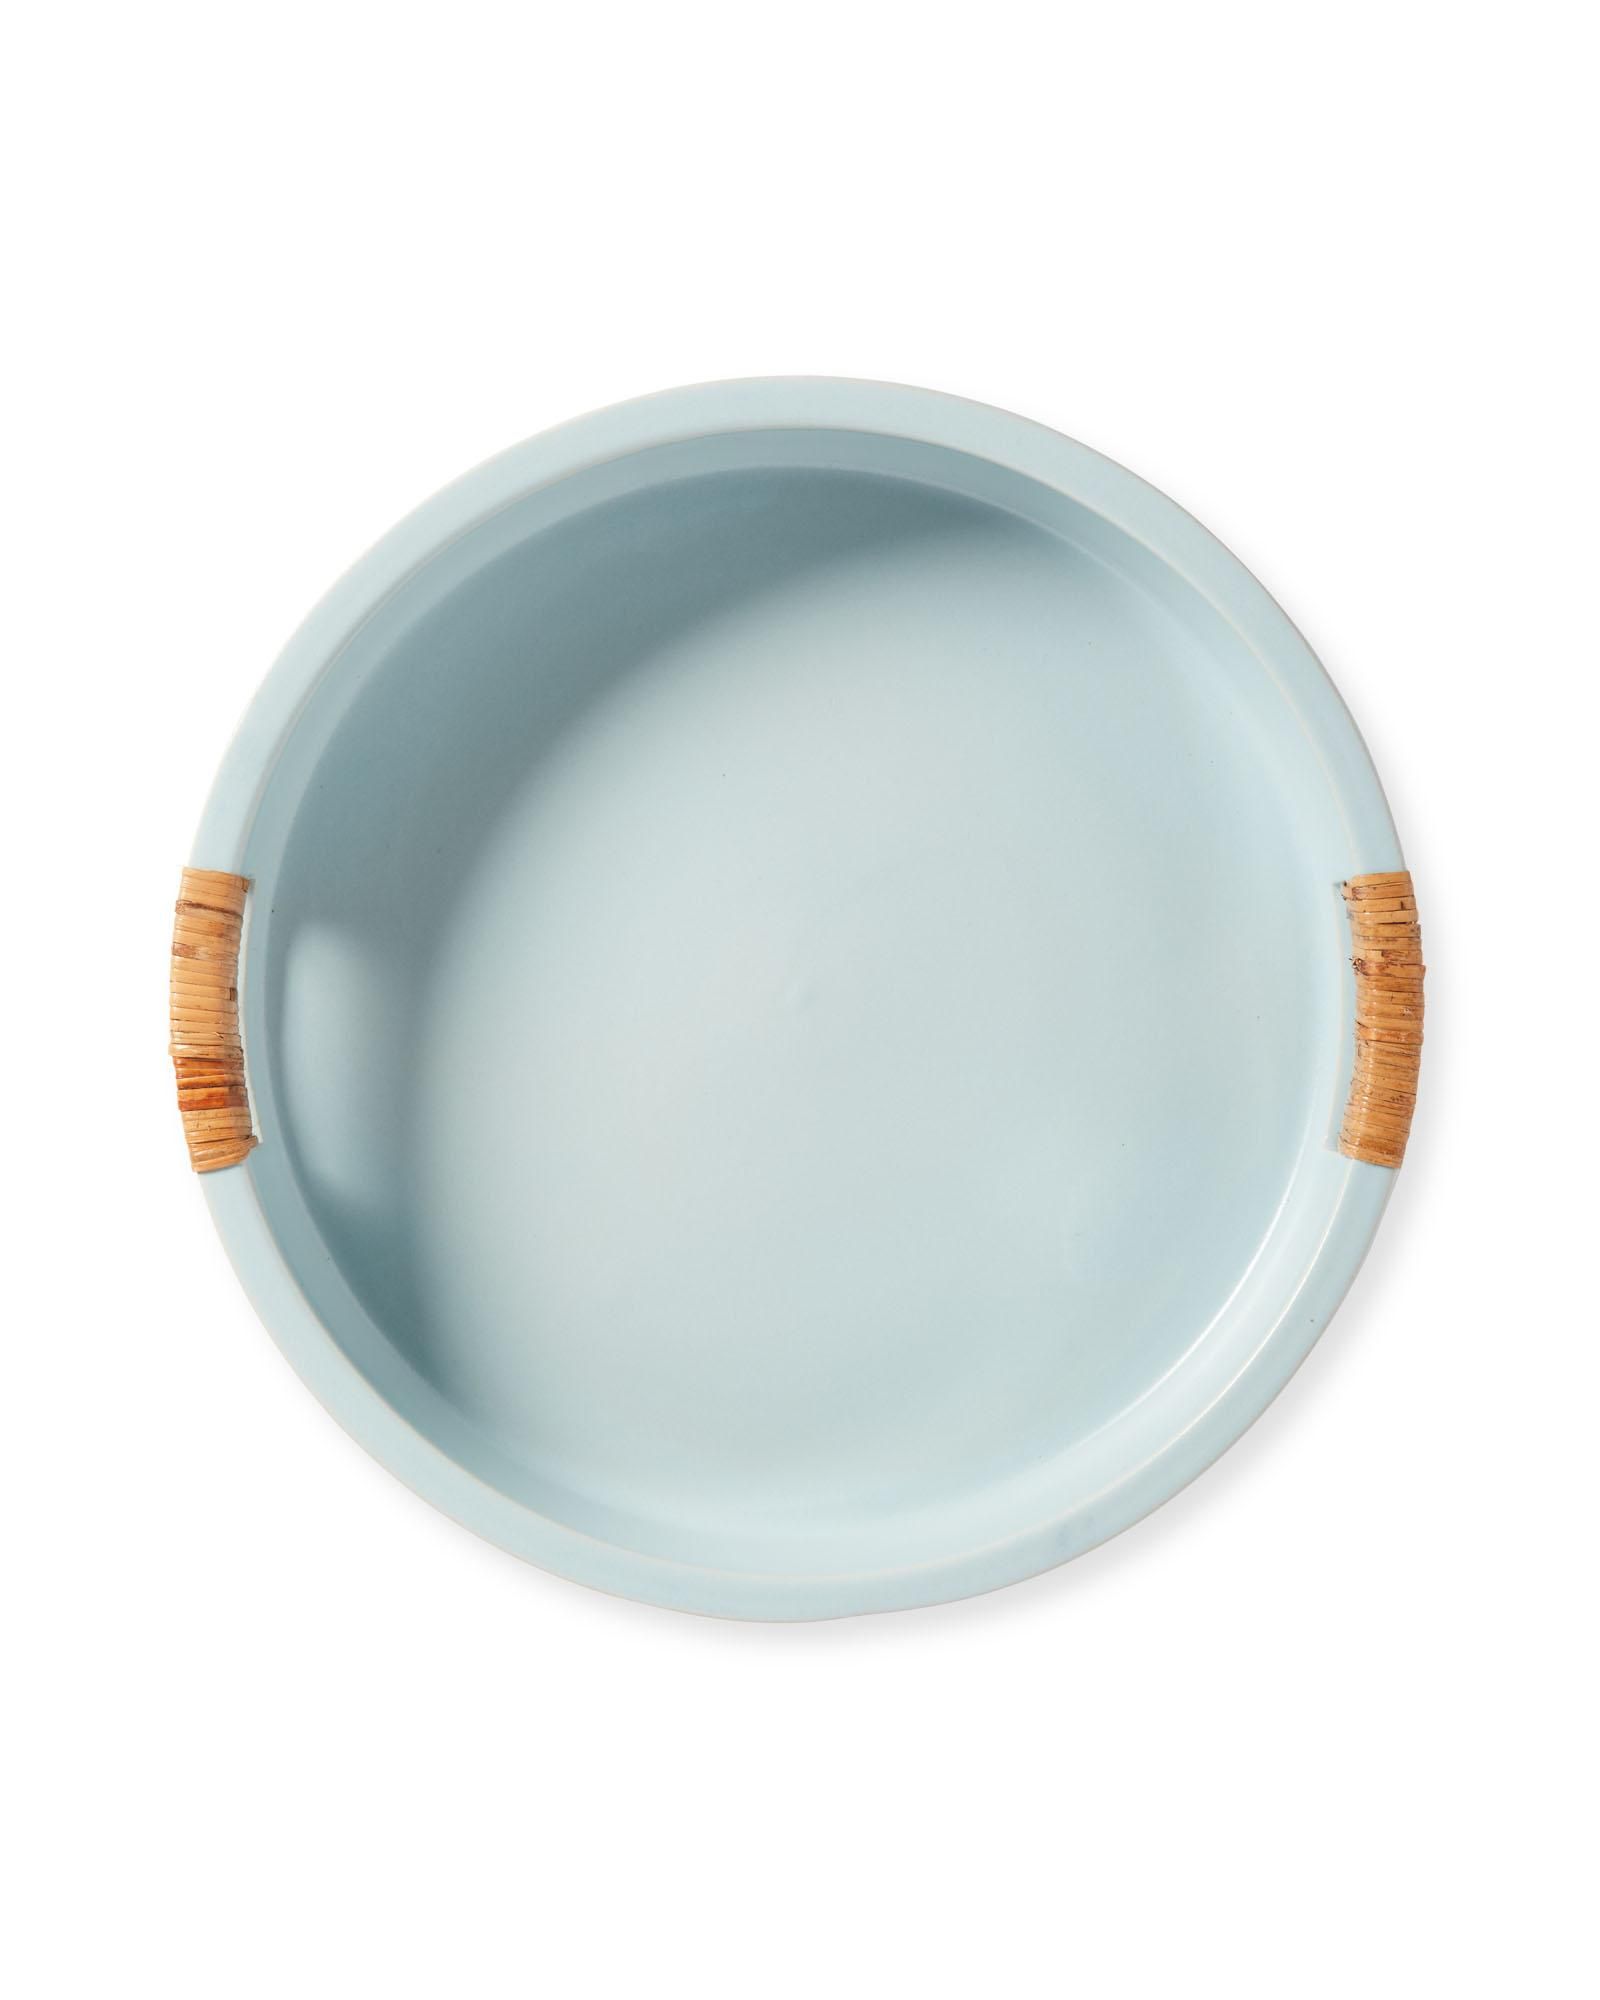 Spinnaker Tray | Serena and Lily